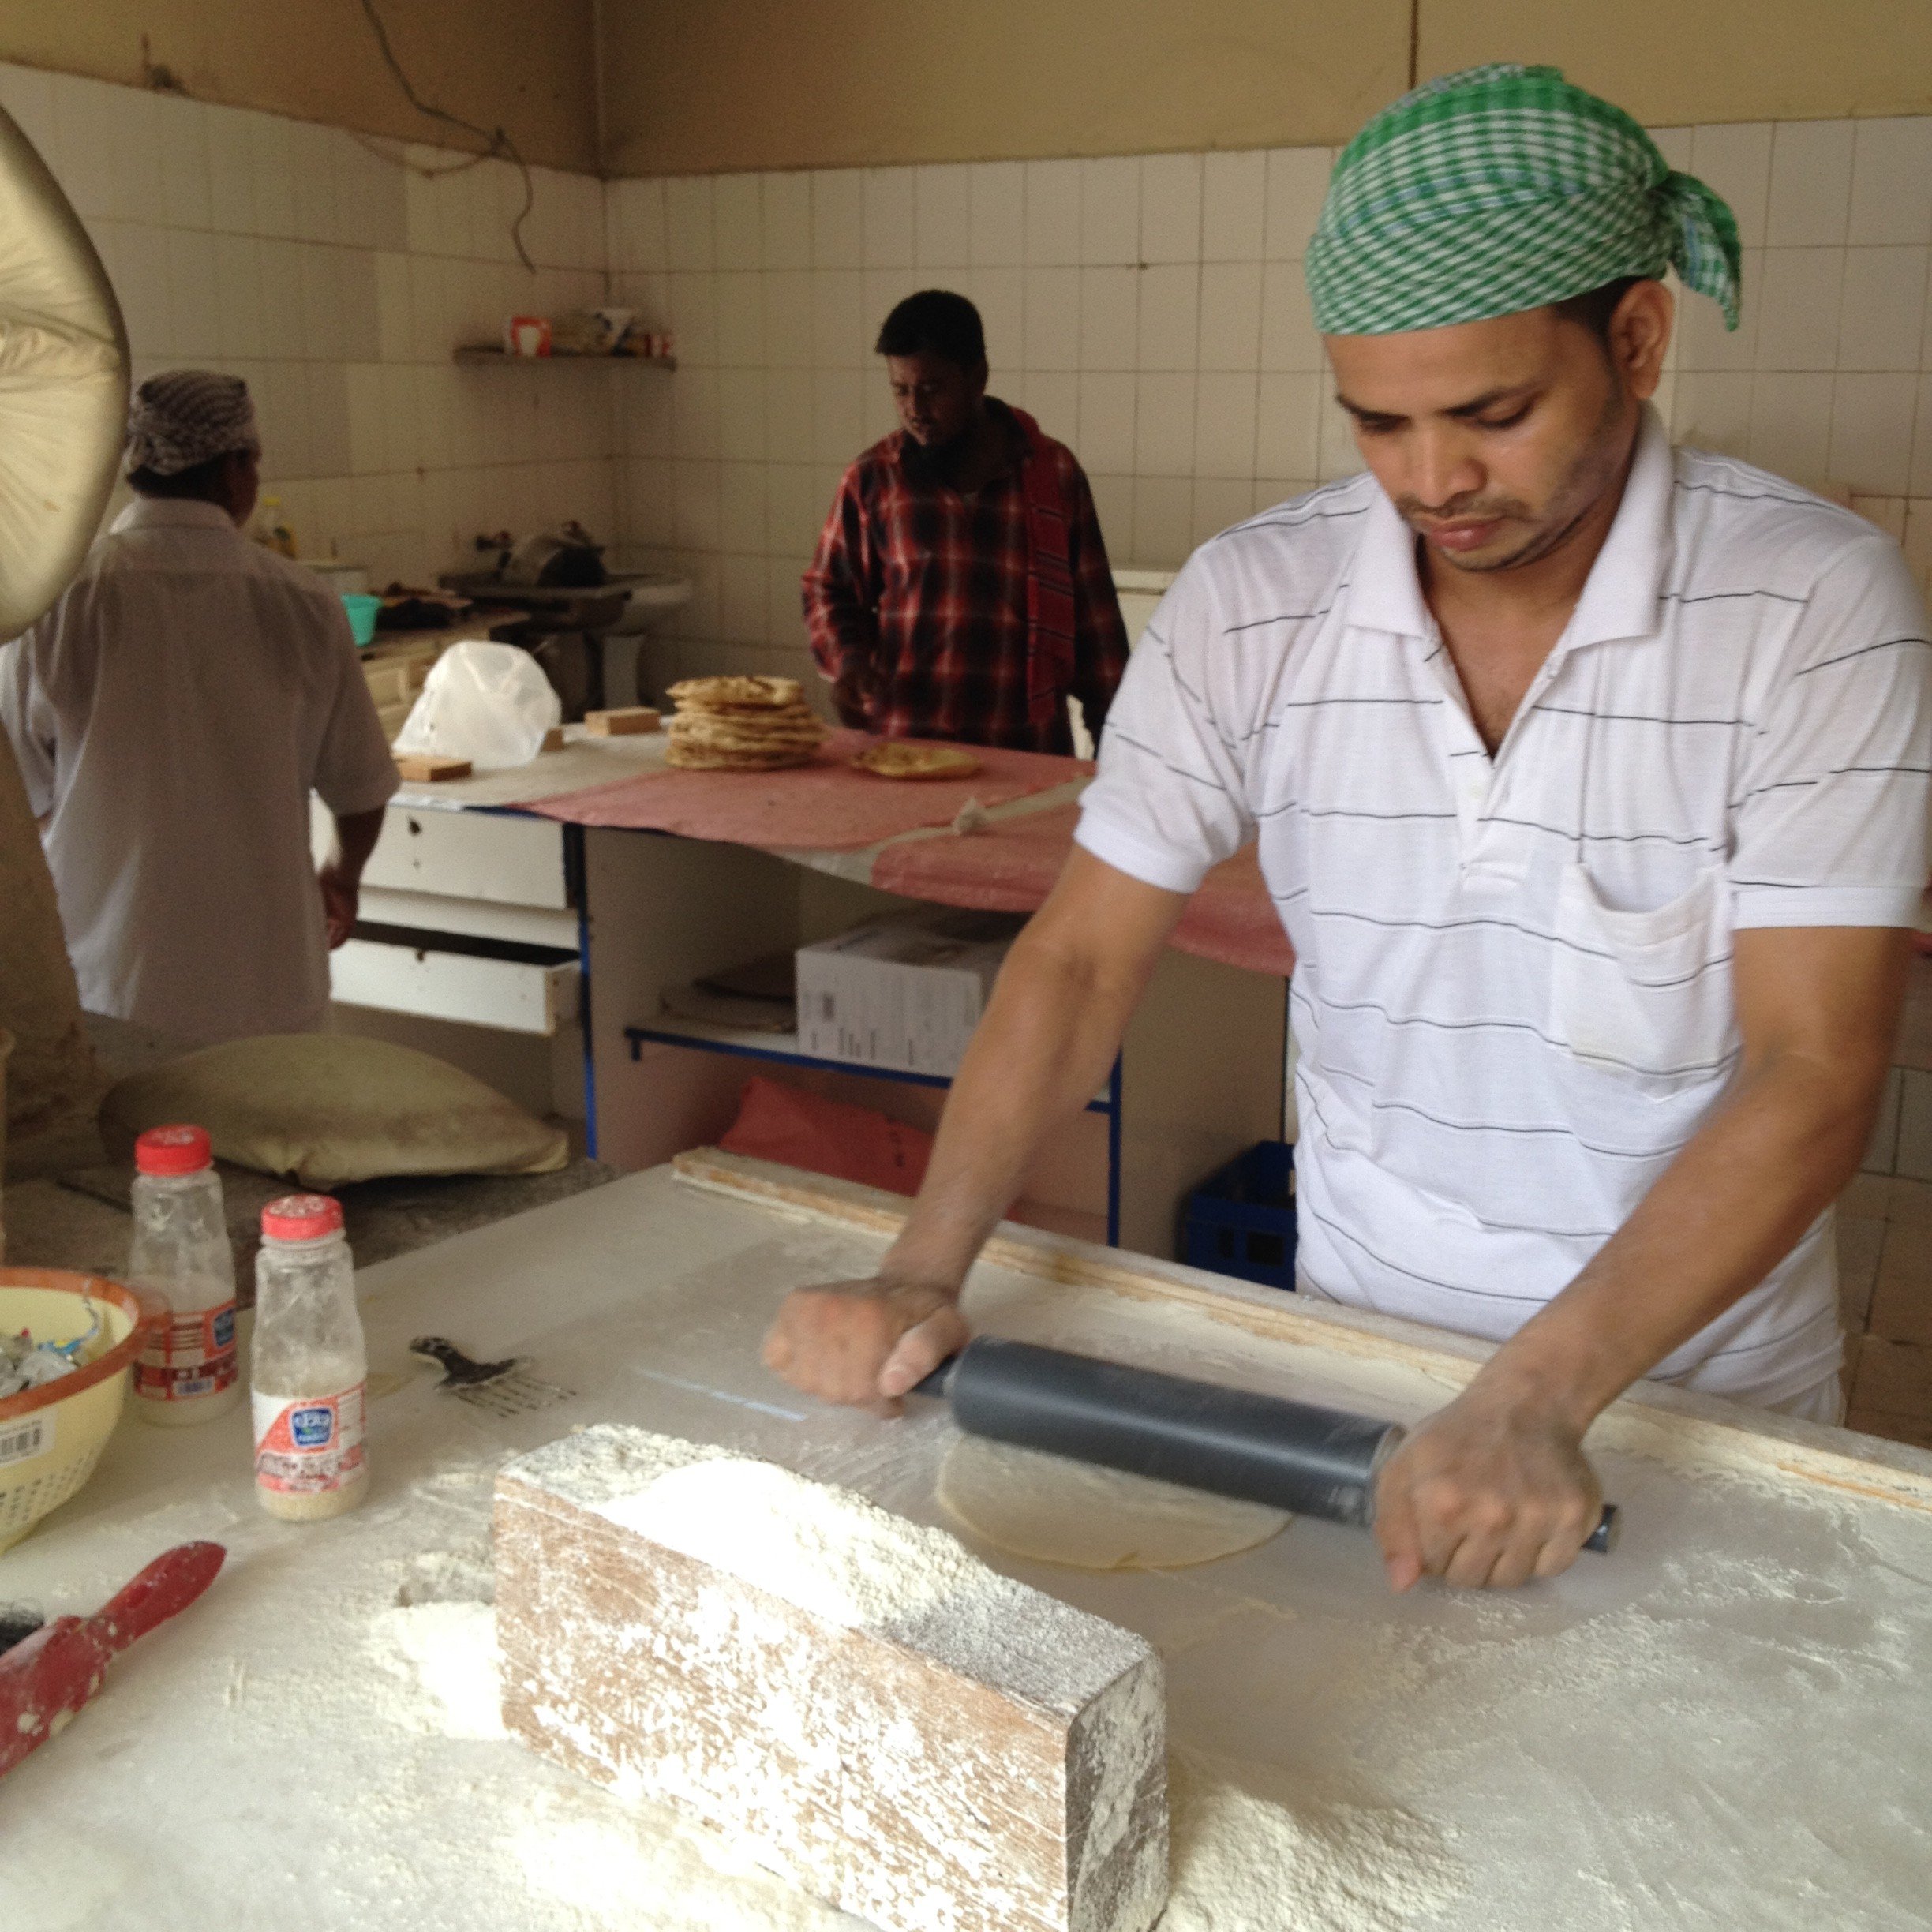 Migrant workers operate the local bakeries in Bahrain. In the Gulf region, these bakeries offer their fresh bread at cheap rates than the packaged bread sold in supermarkets. Bakers endure working around high temperature stone chambers all day, taking breaks from work only for prayers. 